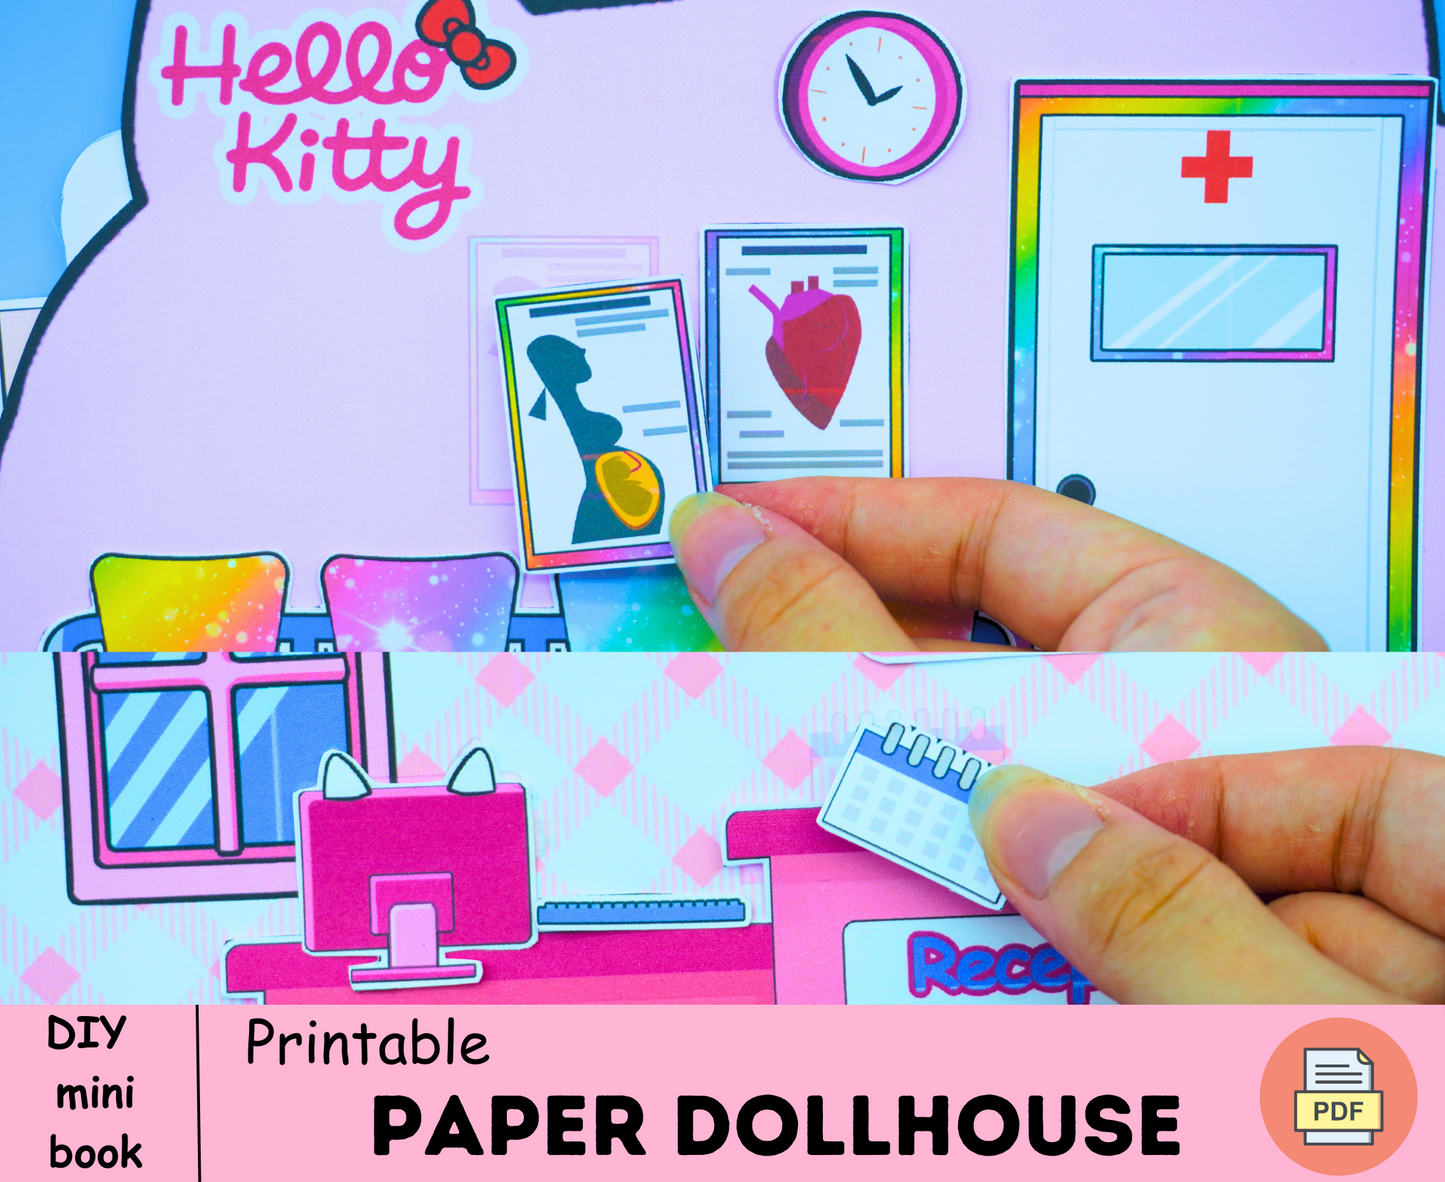 Kitty Cat Hospital vs Doctor Barbie printables 🌈 Pink Kitty dollhouse busy book printables | DIY kit for kids | Cutting Practice for girls🌈 Woa Doll Crafts